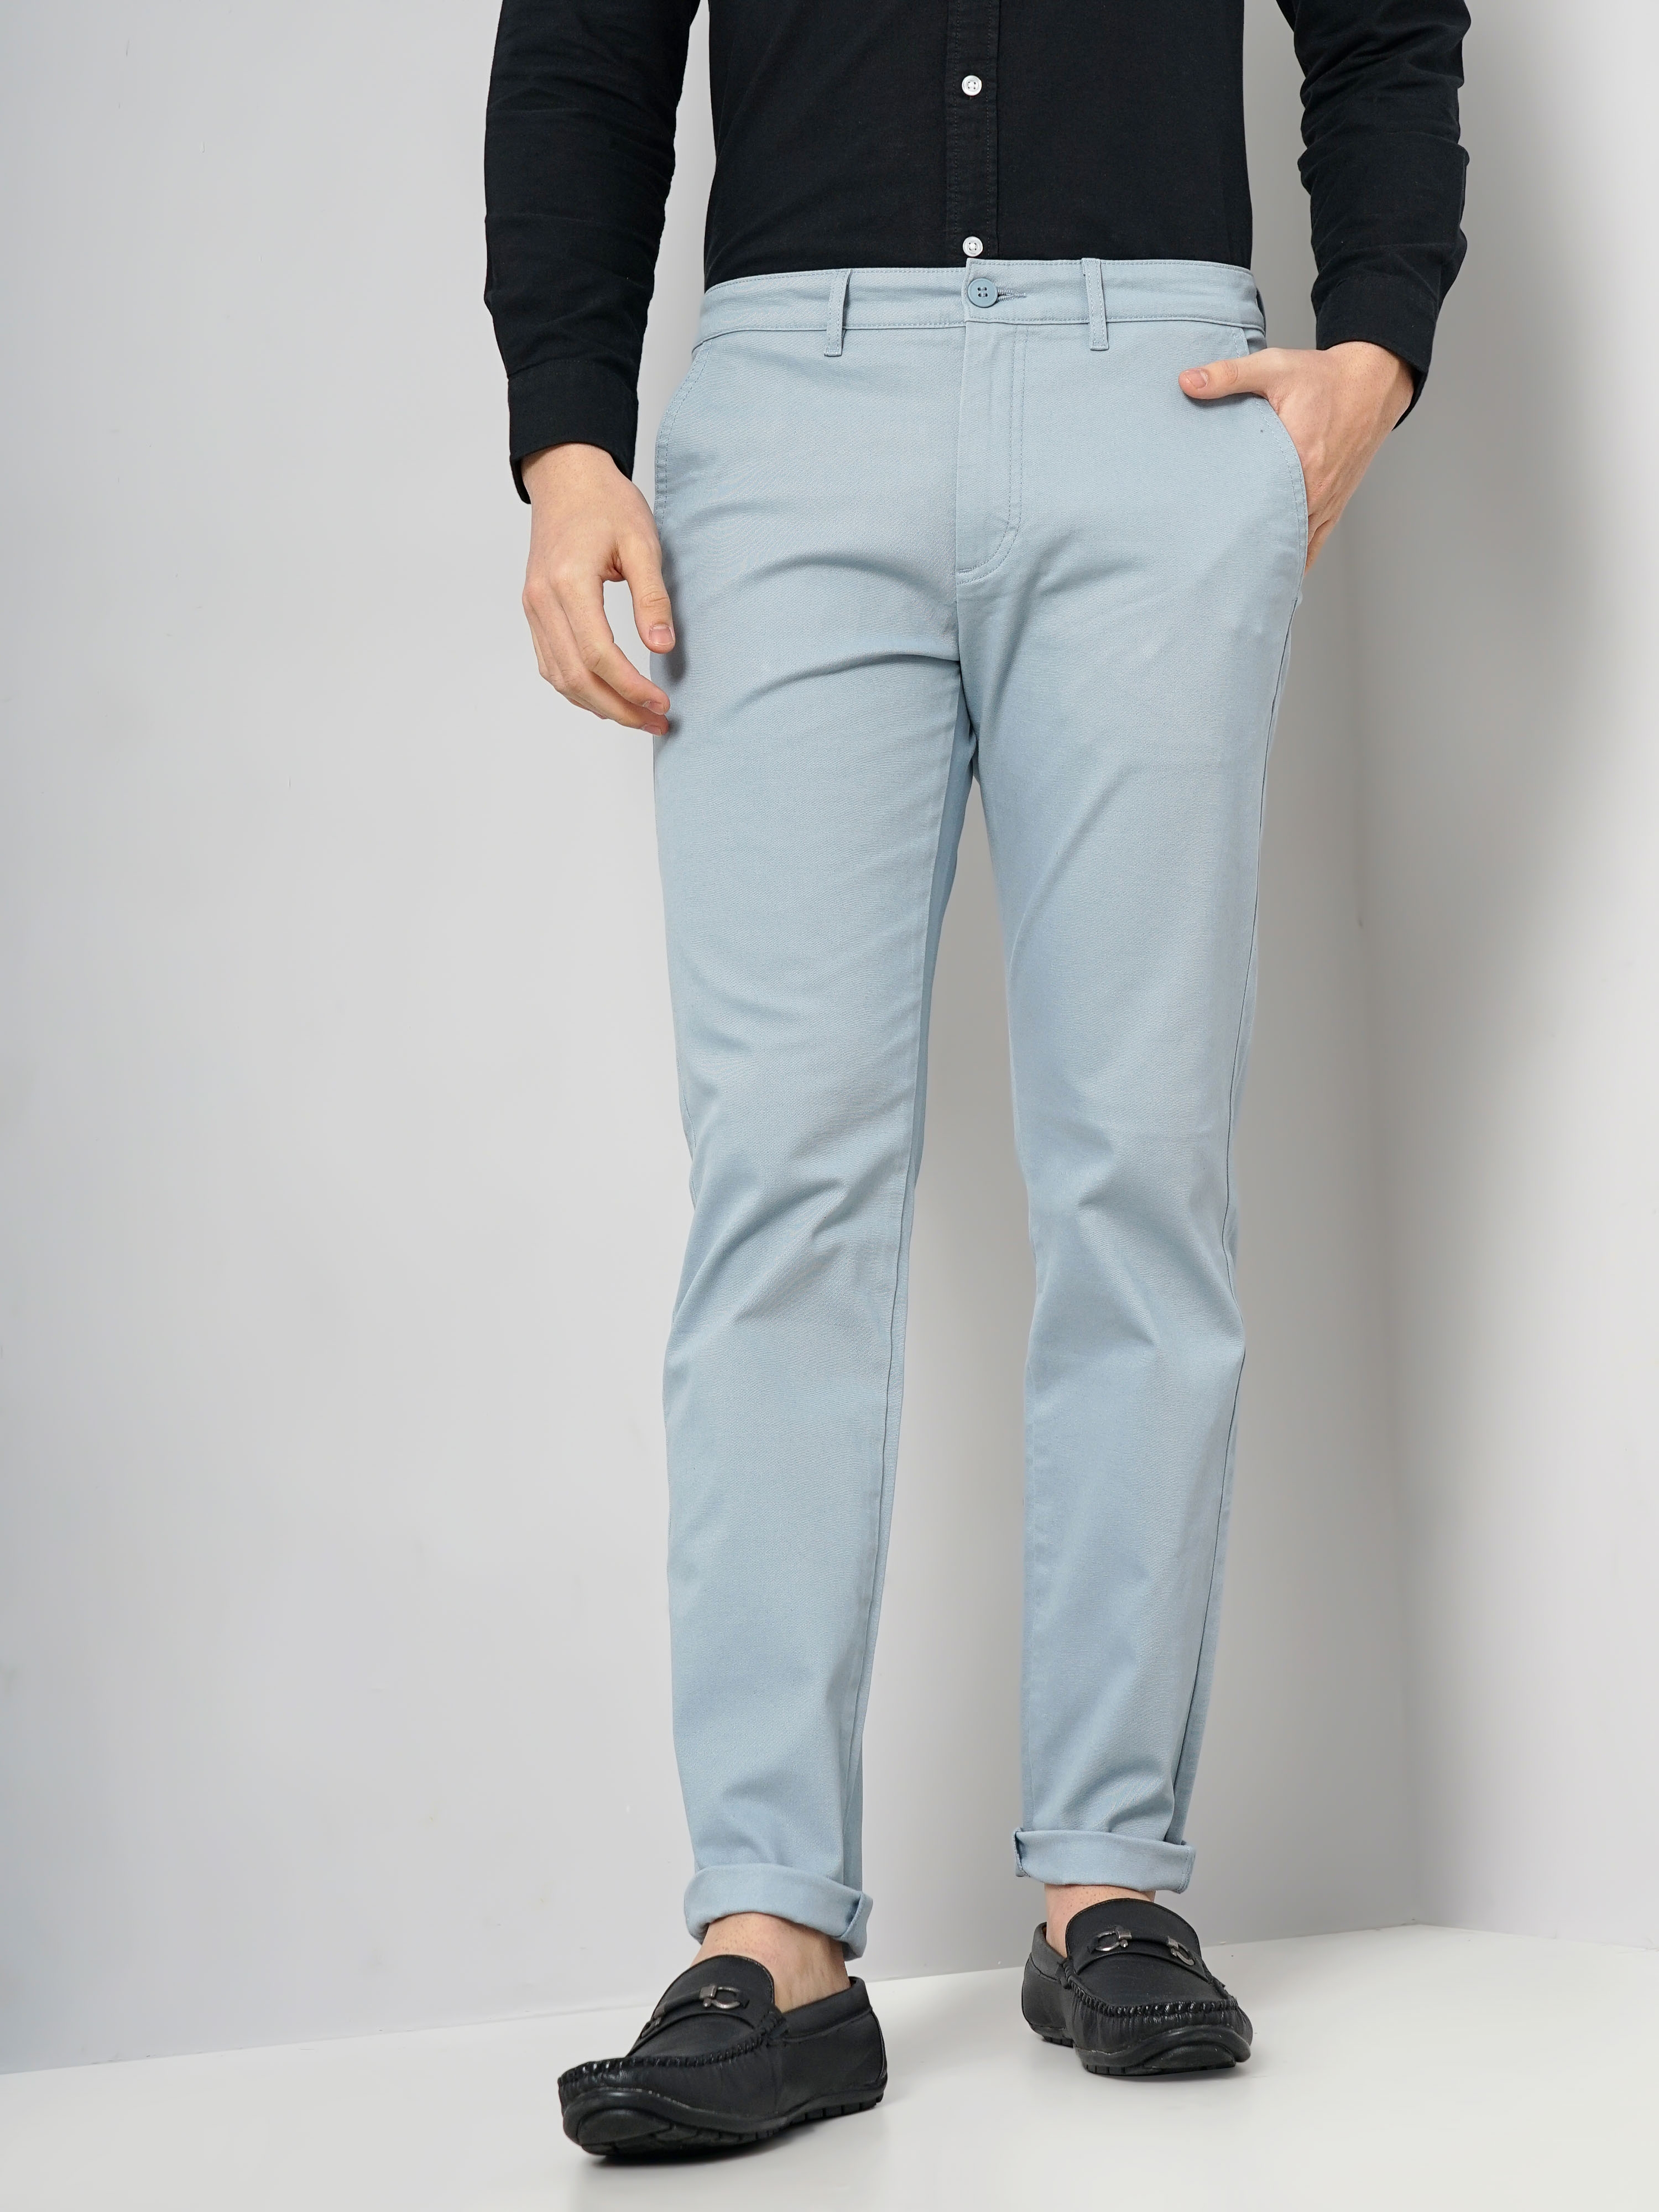 Celio Men Blue Solid Slim Fit Cotton Basic Chinos Casual Trousers